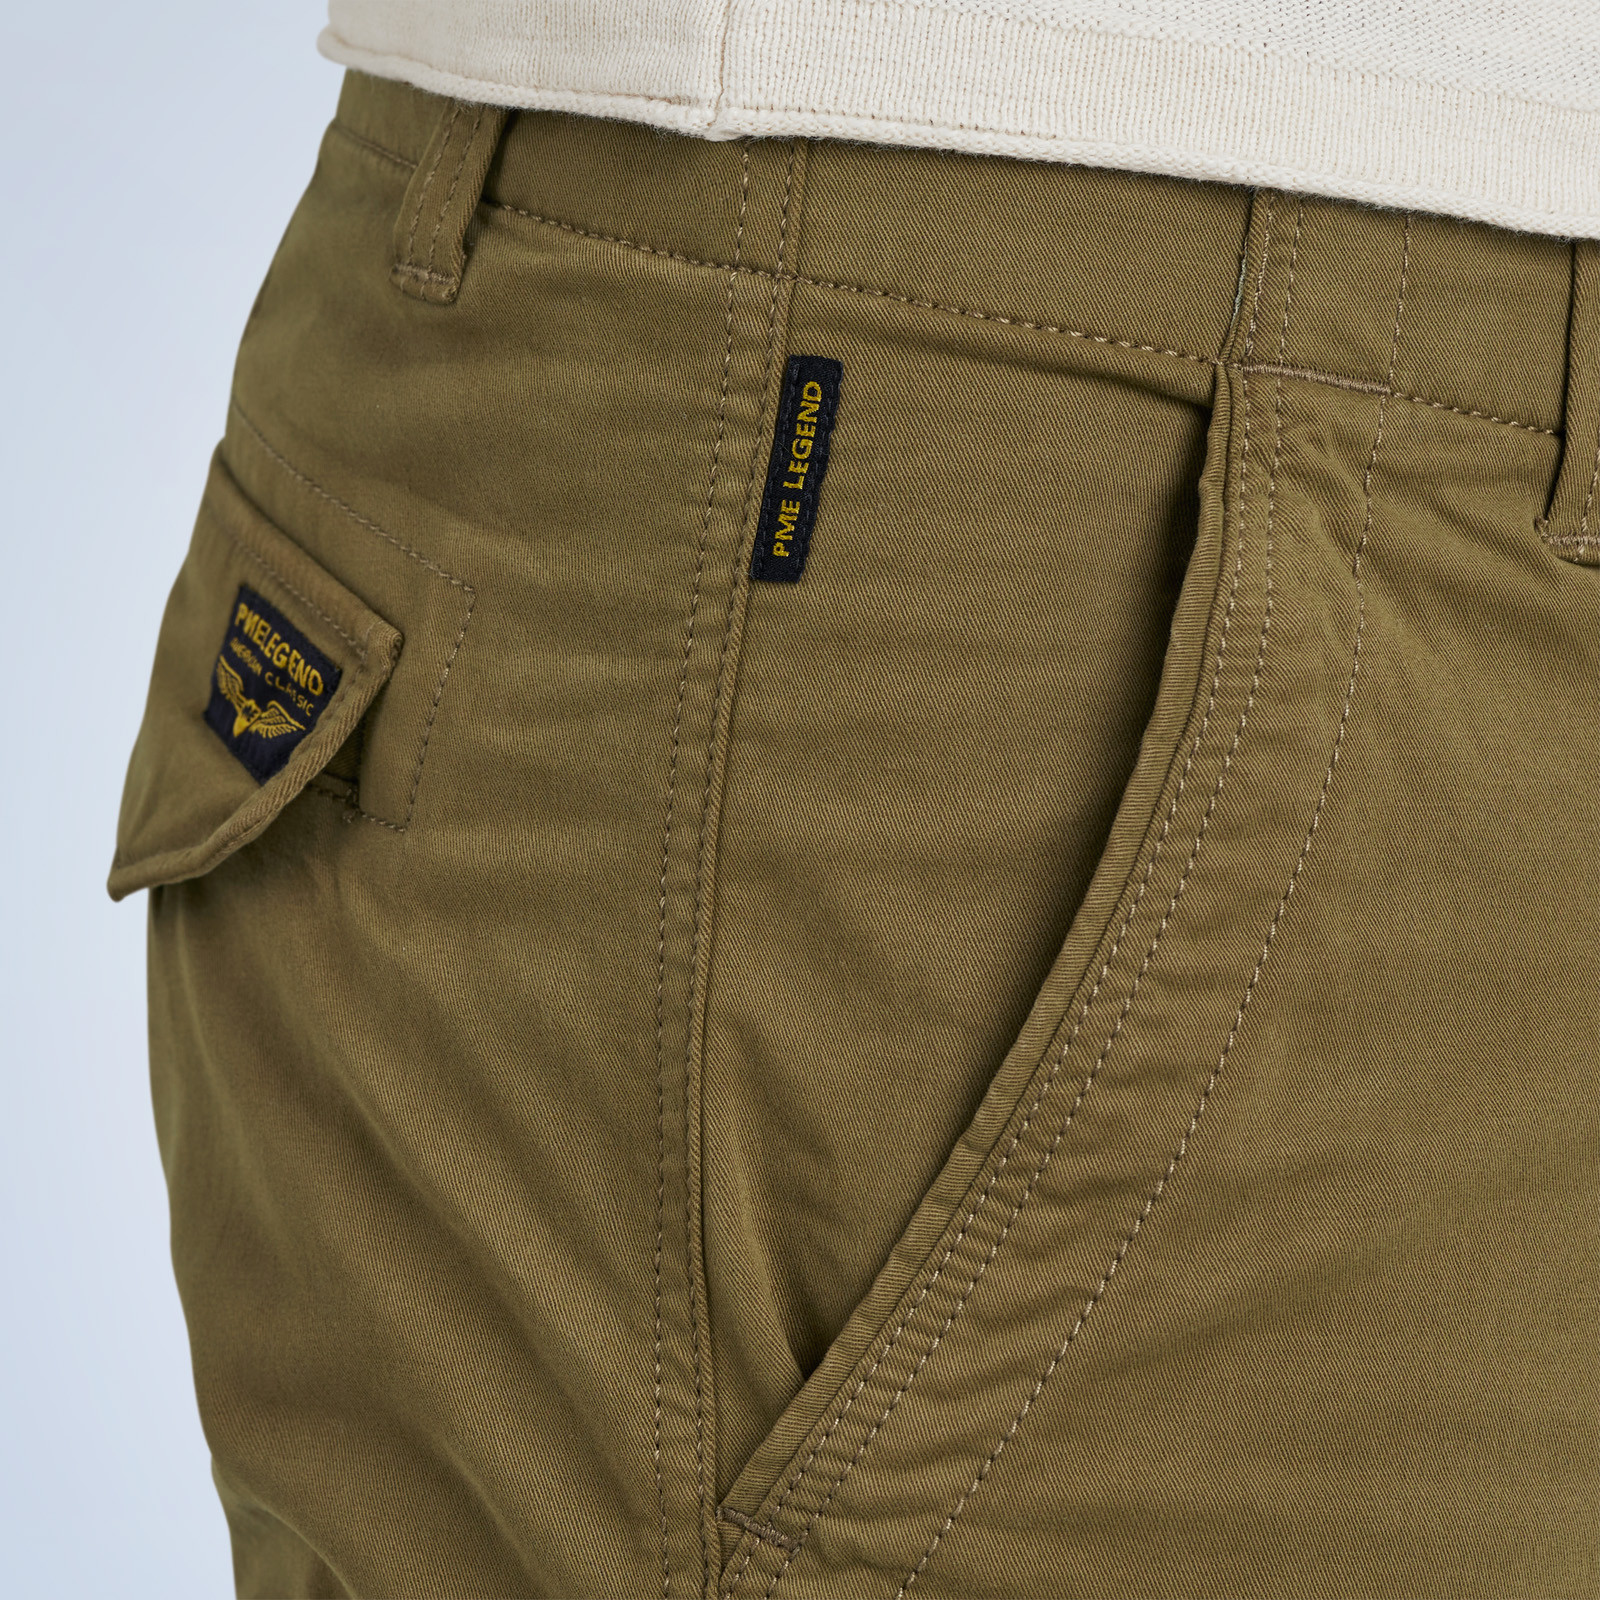 Nordrop and returns LEGEND Free cargo pants | PME shipping | fit tapered